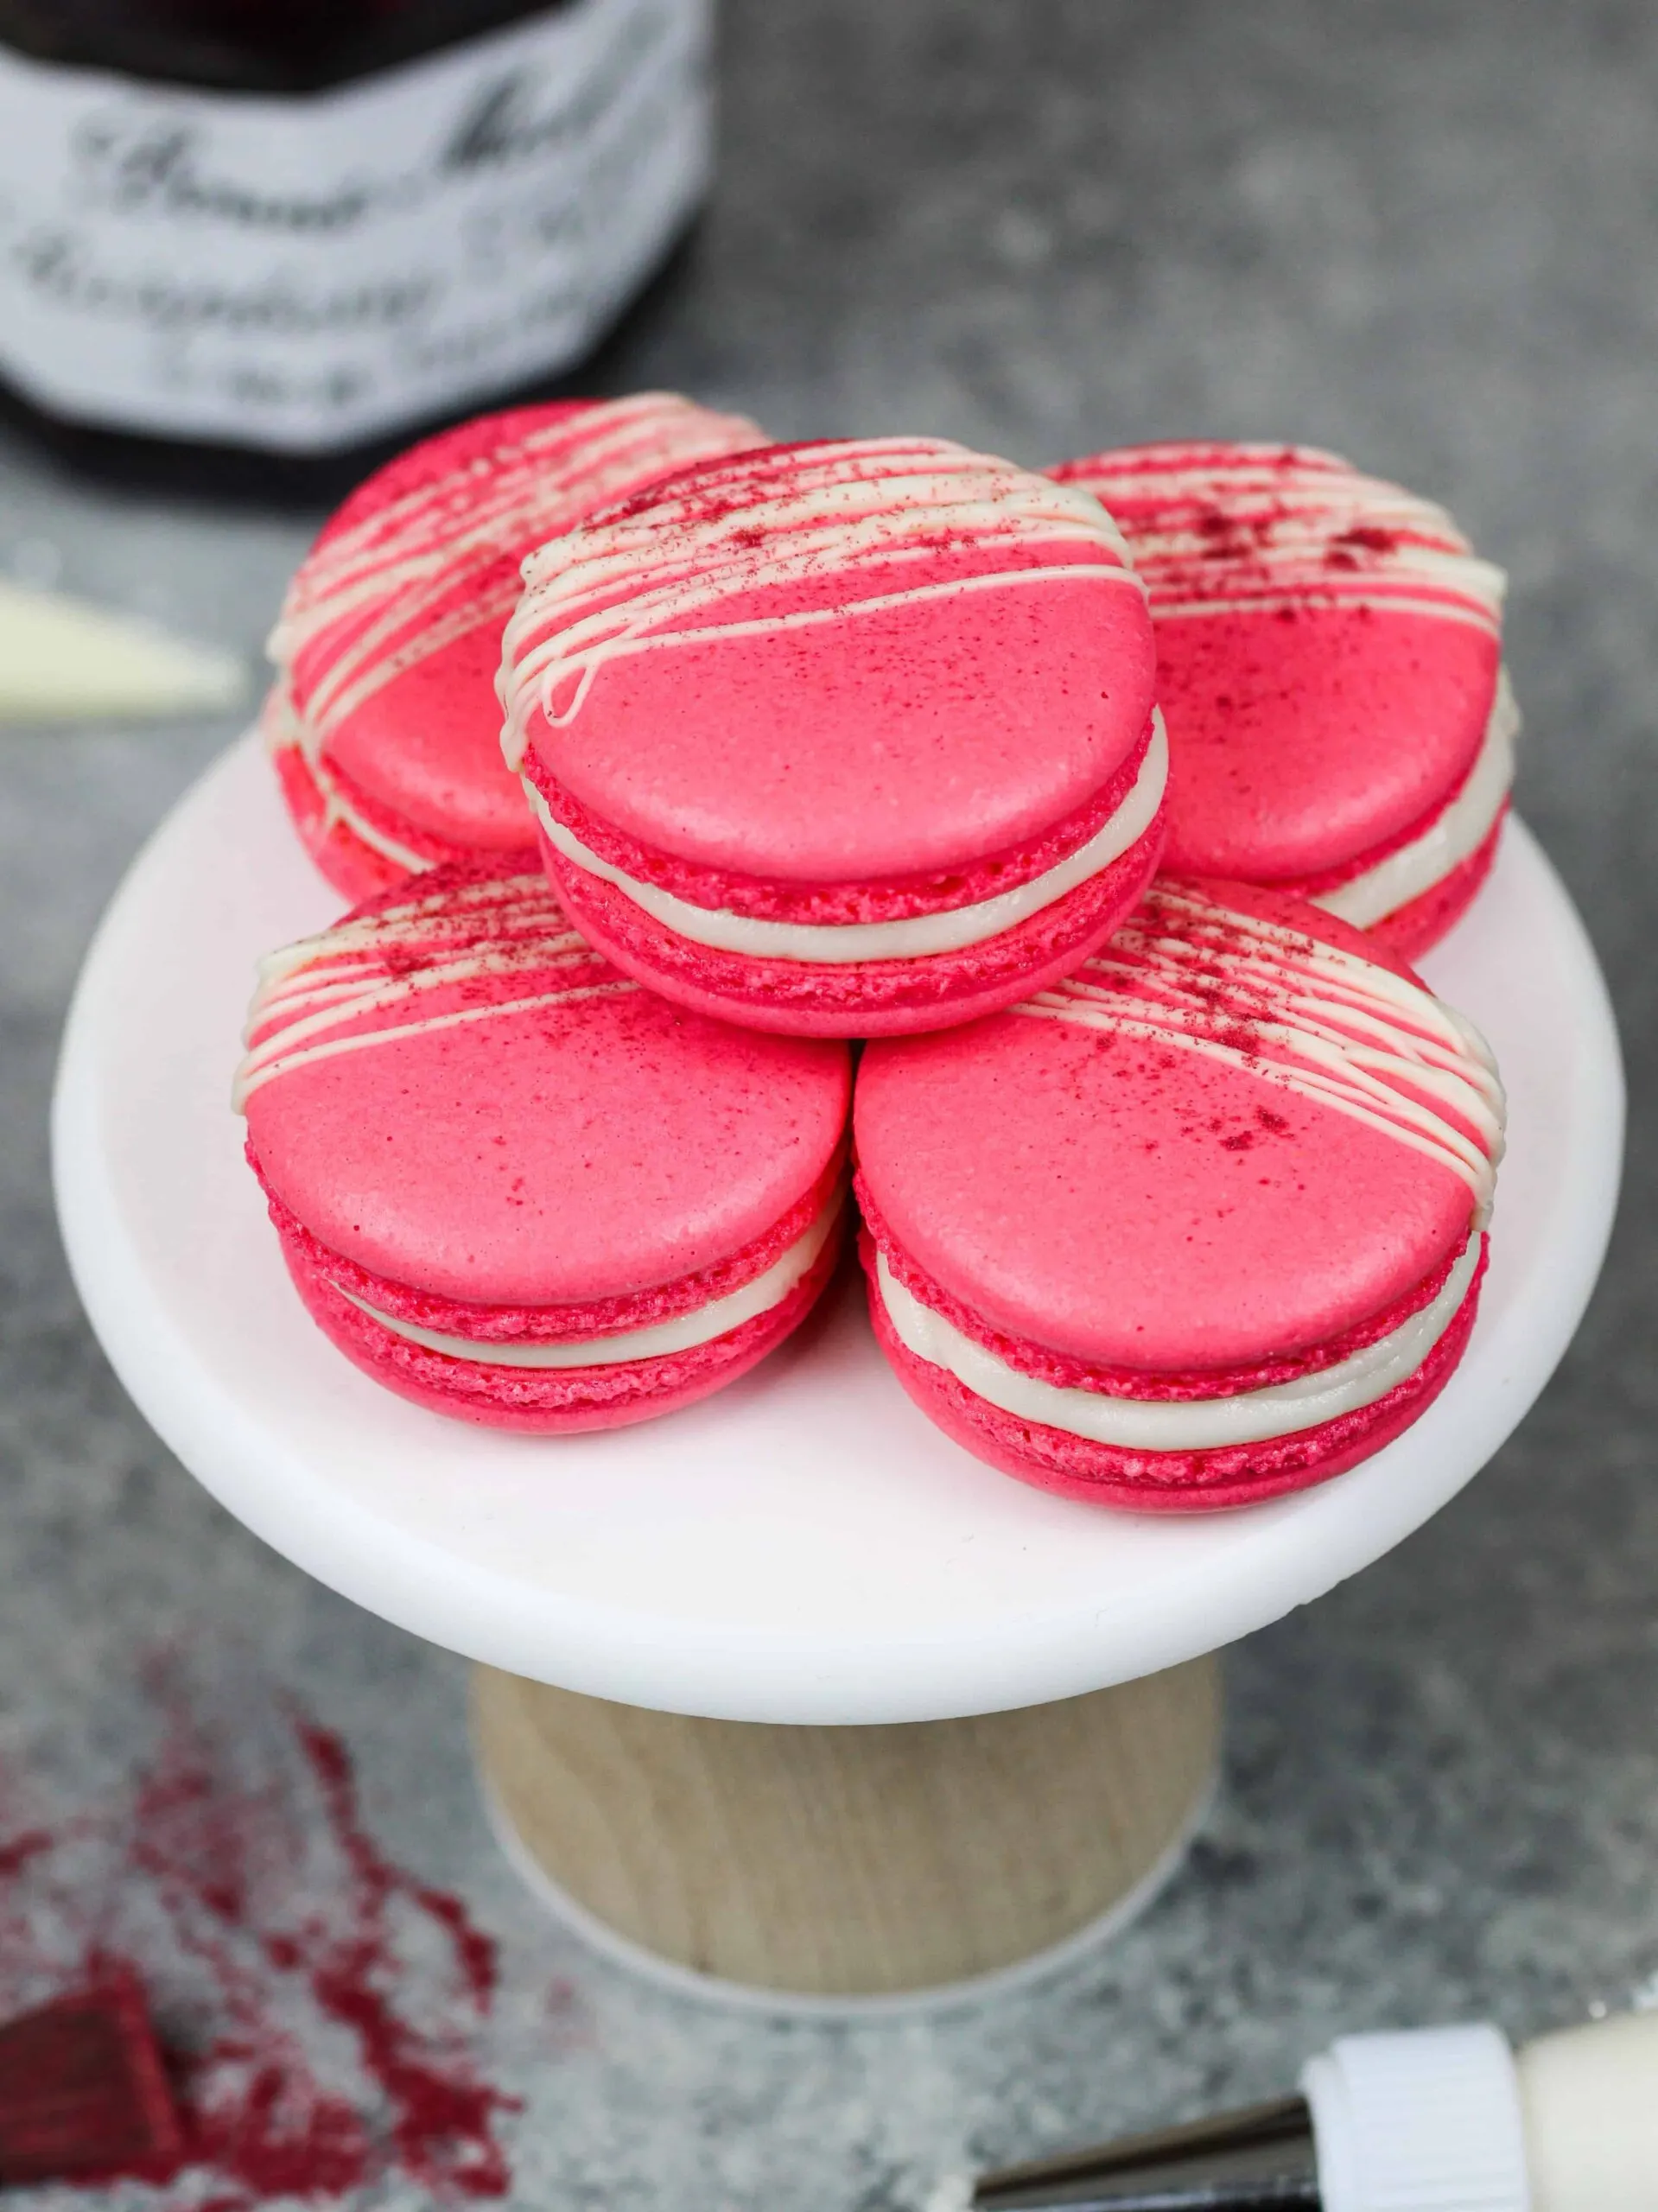 image of raspberry macarons decorated with white chocolate and freeze dried raspberry powder